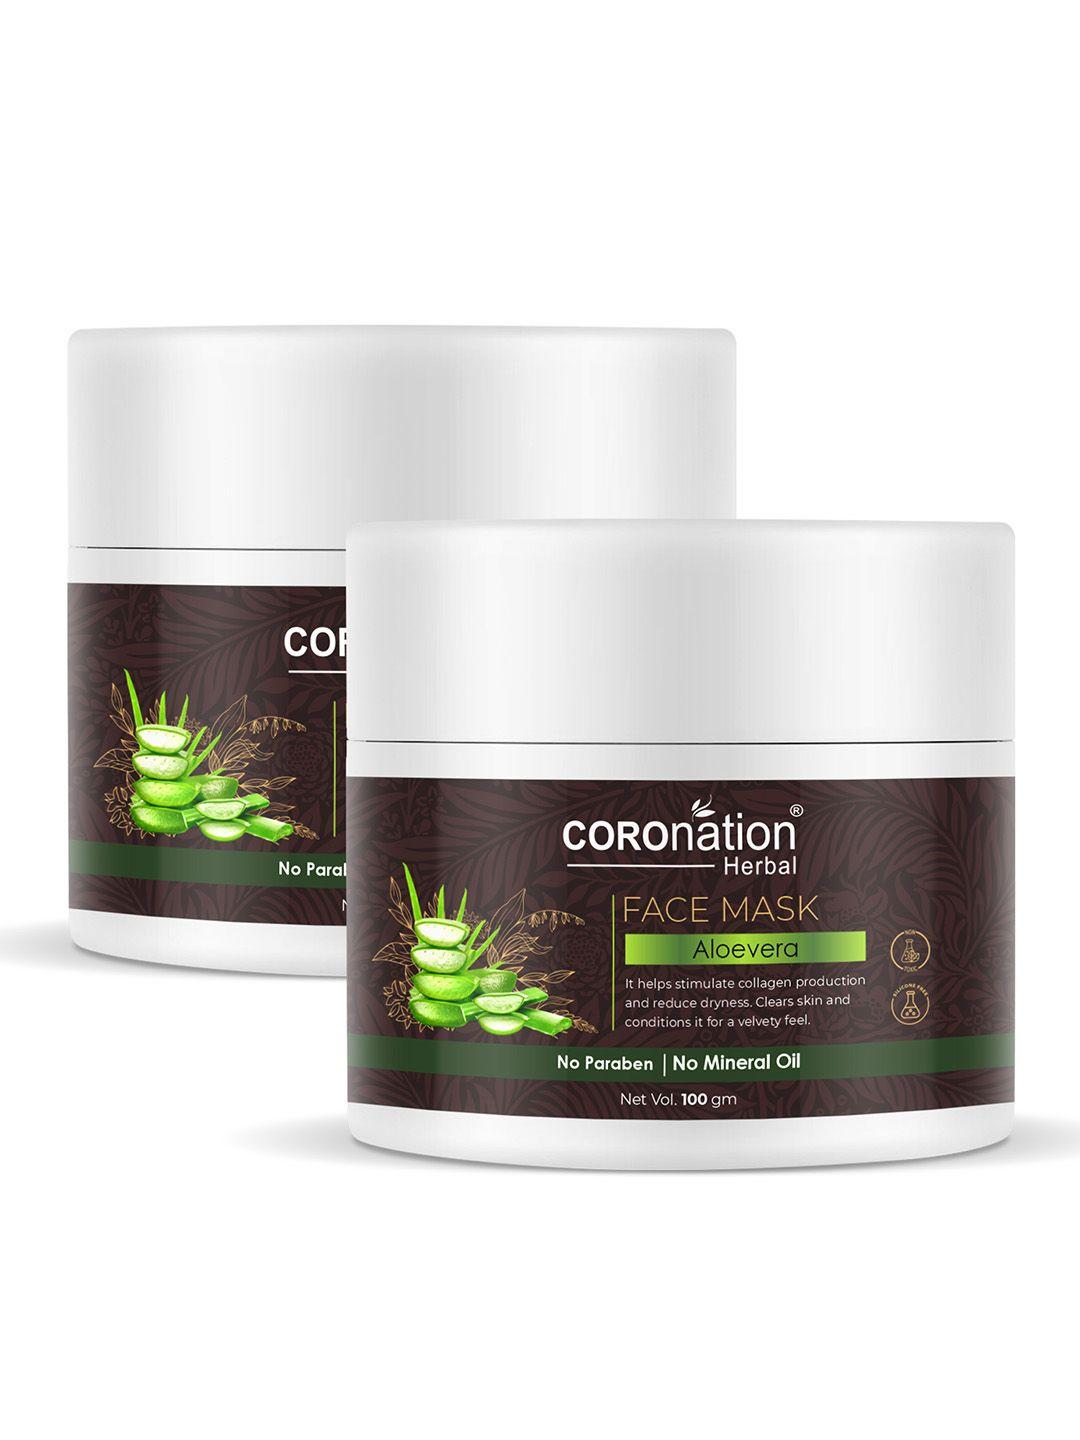 coronation herbal set of 2 aloe vera face masks for collagen production - 100 g each